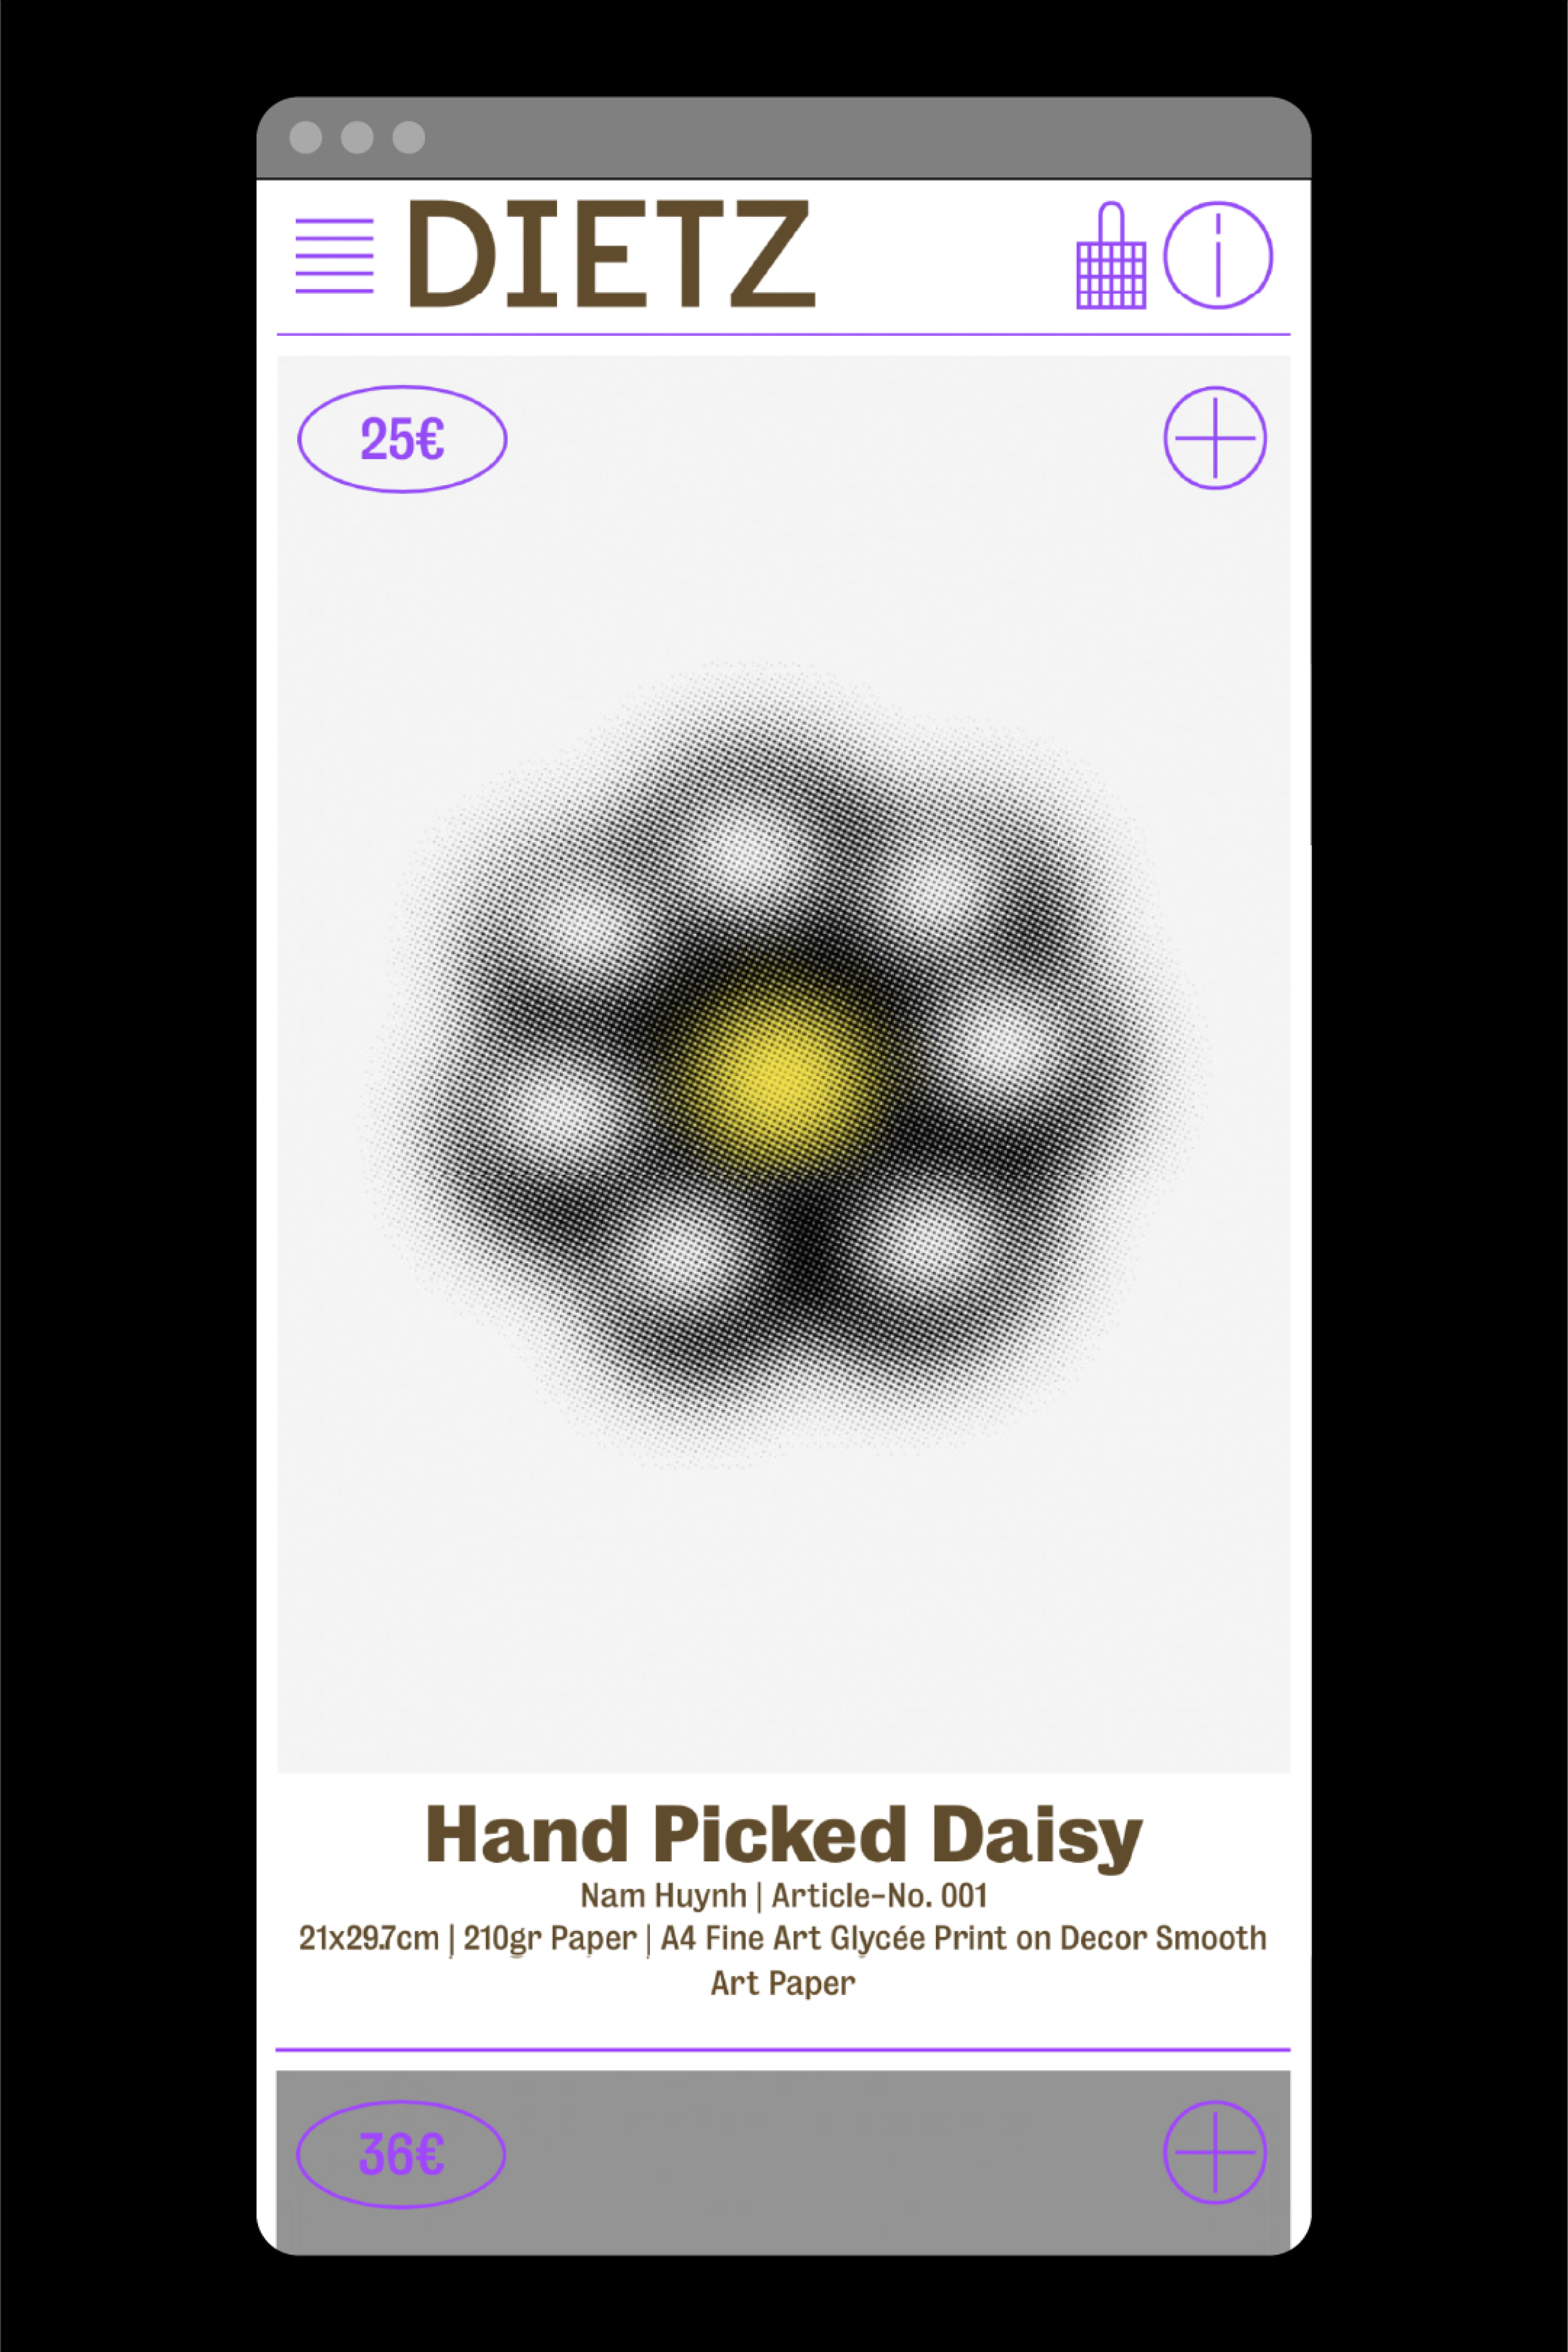 Illustration of a hand picked daisy.